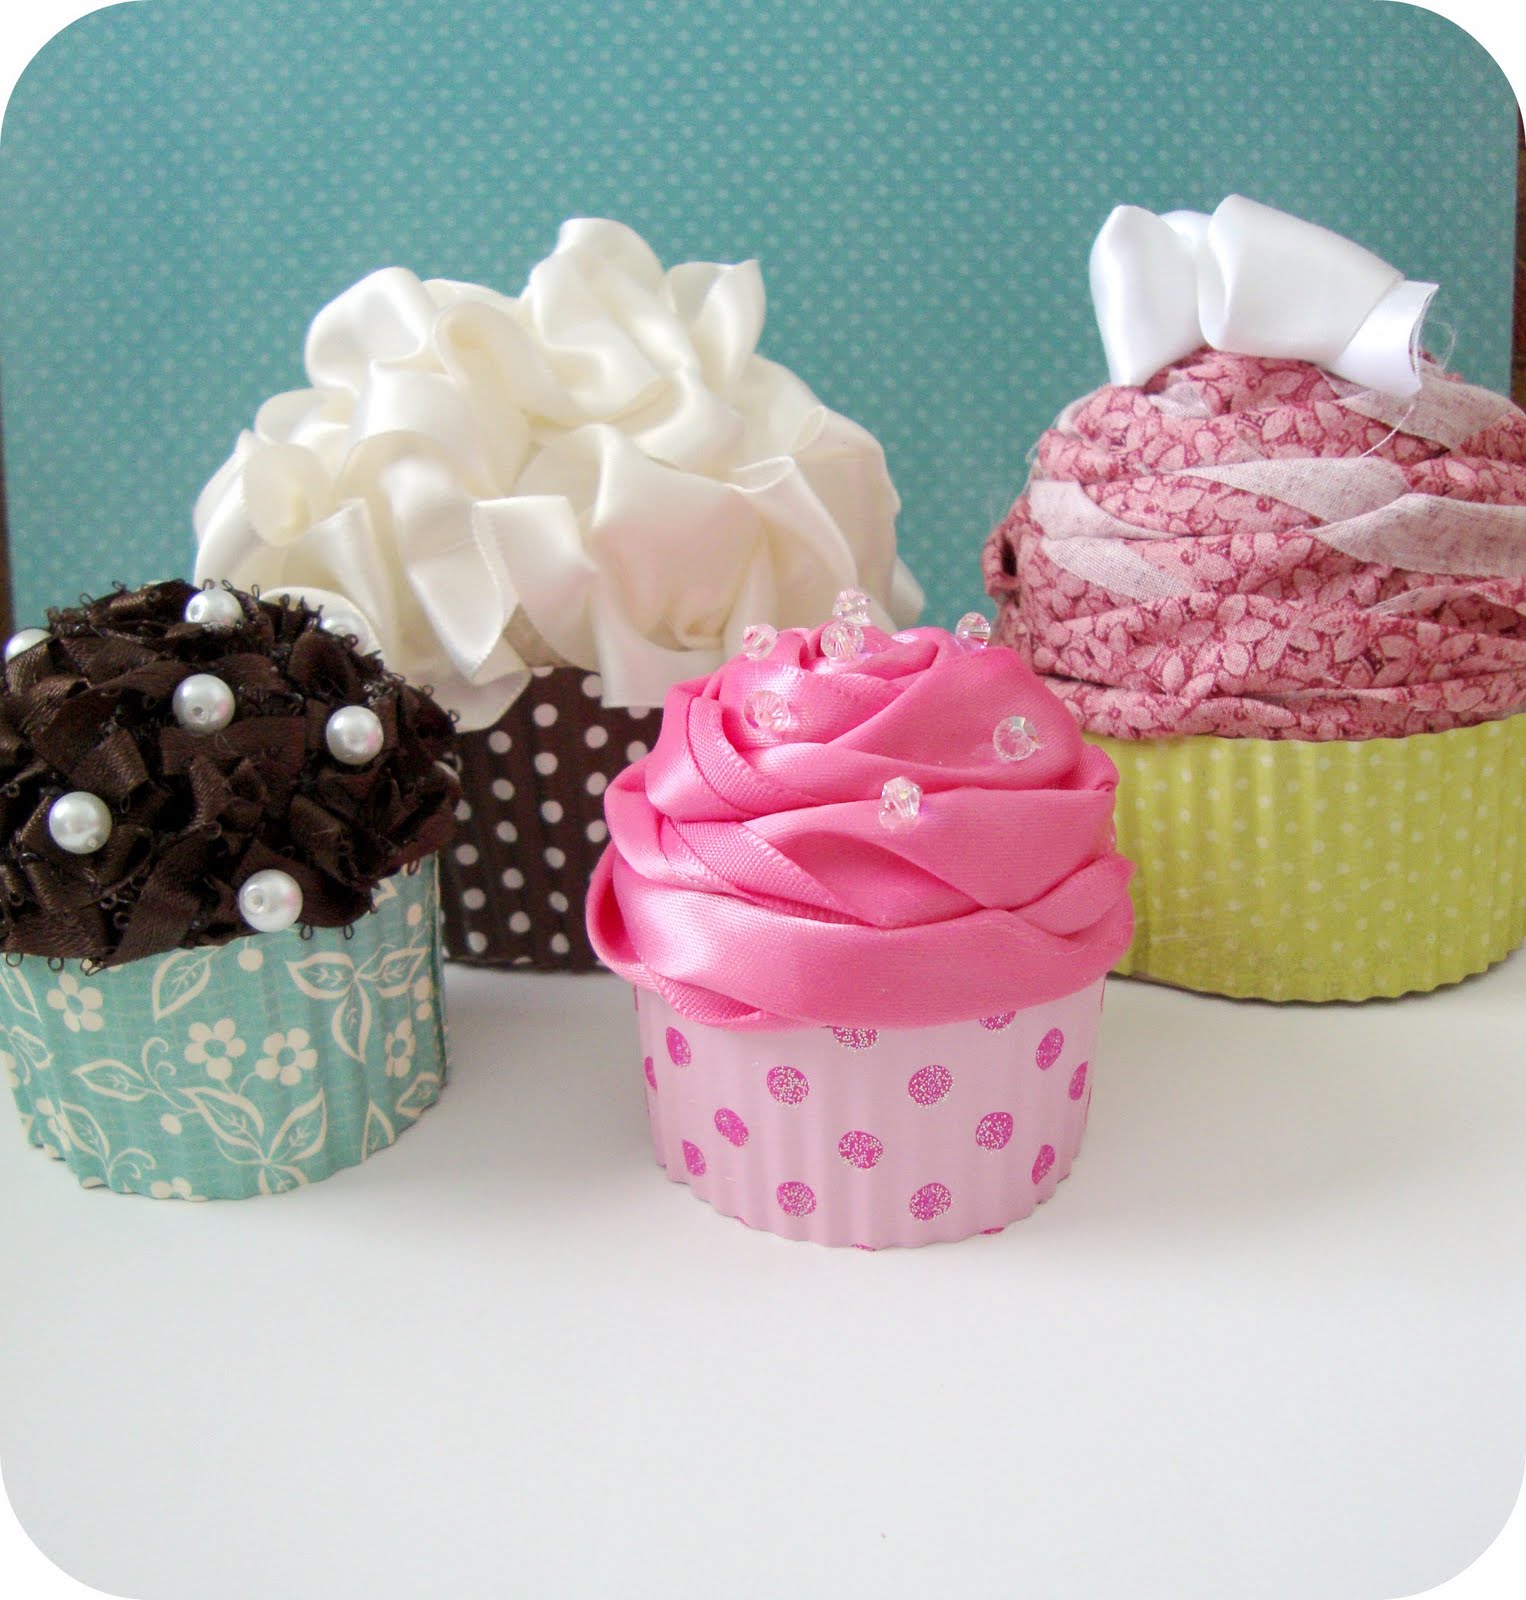 cupcake-gift-box-chilly-gift-boxes-set-of-12-decorative-treats-boxes